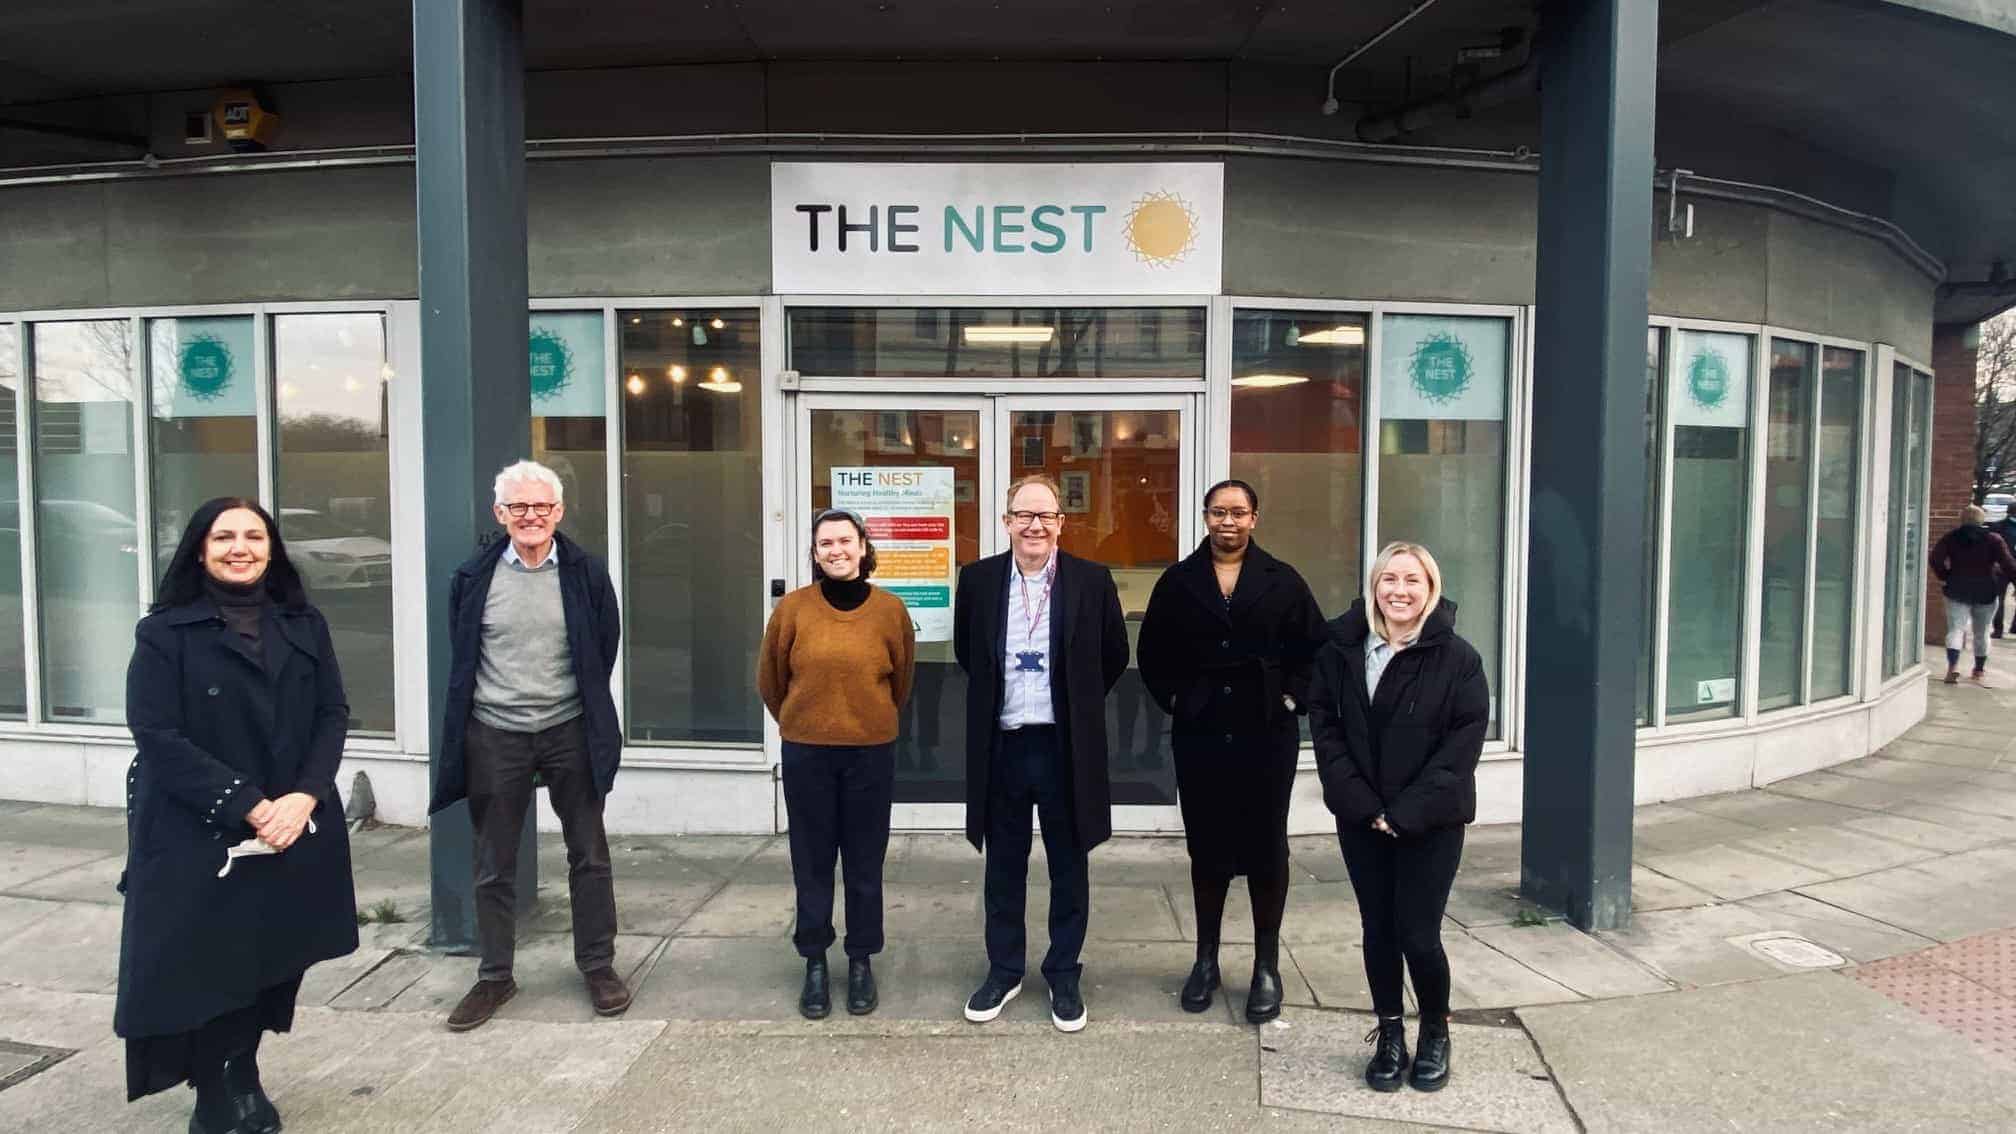 From l-r: Cllr Jasmine Ali, Sir Norman Lamb (Chair of the Children and Young People’s Mental Health Coalition), Hannah Kashman (Service Manager at The Nest), David Bradley (Chief Executive at South London and Maudsley NHS Foundation Trust), Kadra Abdinasir (Strategic Lead at the Children and Young People’s Mental Health Coalition) and Charlotte Rainer (Coalition Lead at the Children and Young People’s Mental Health Coalition)